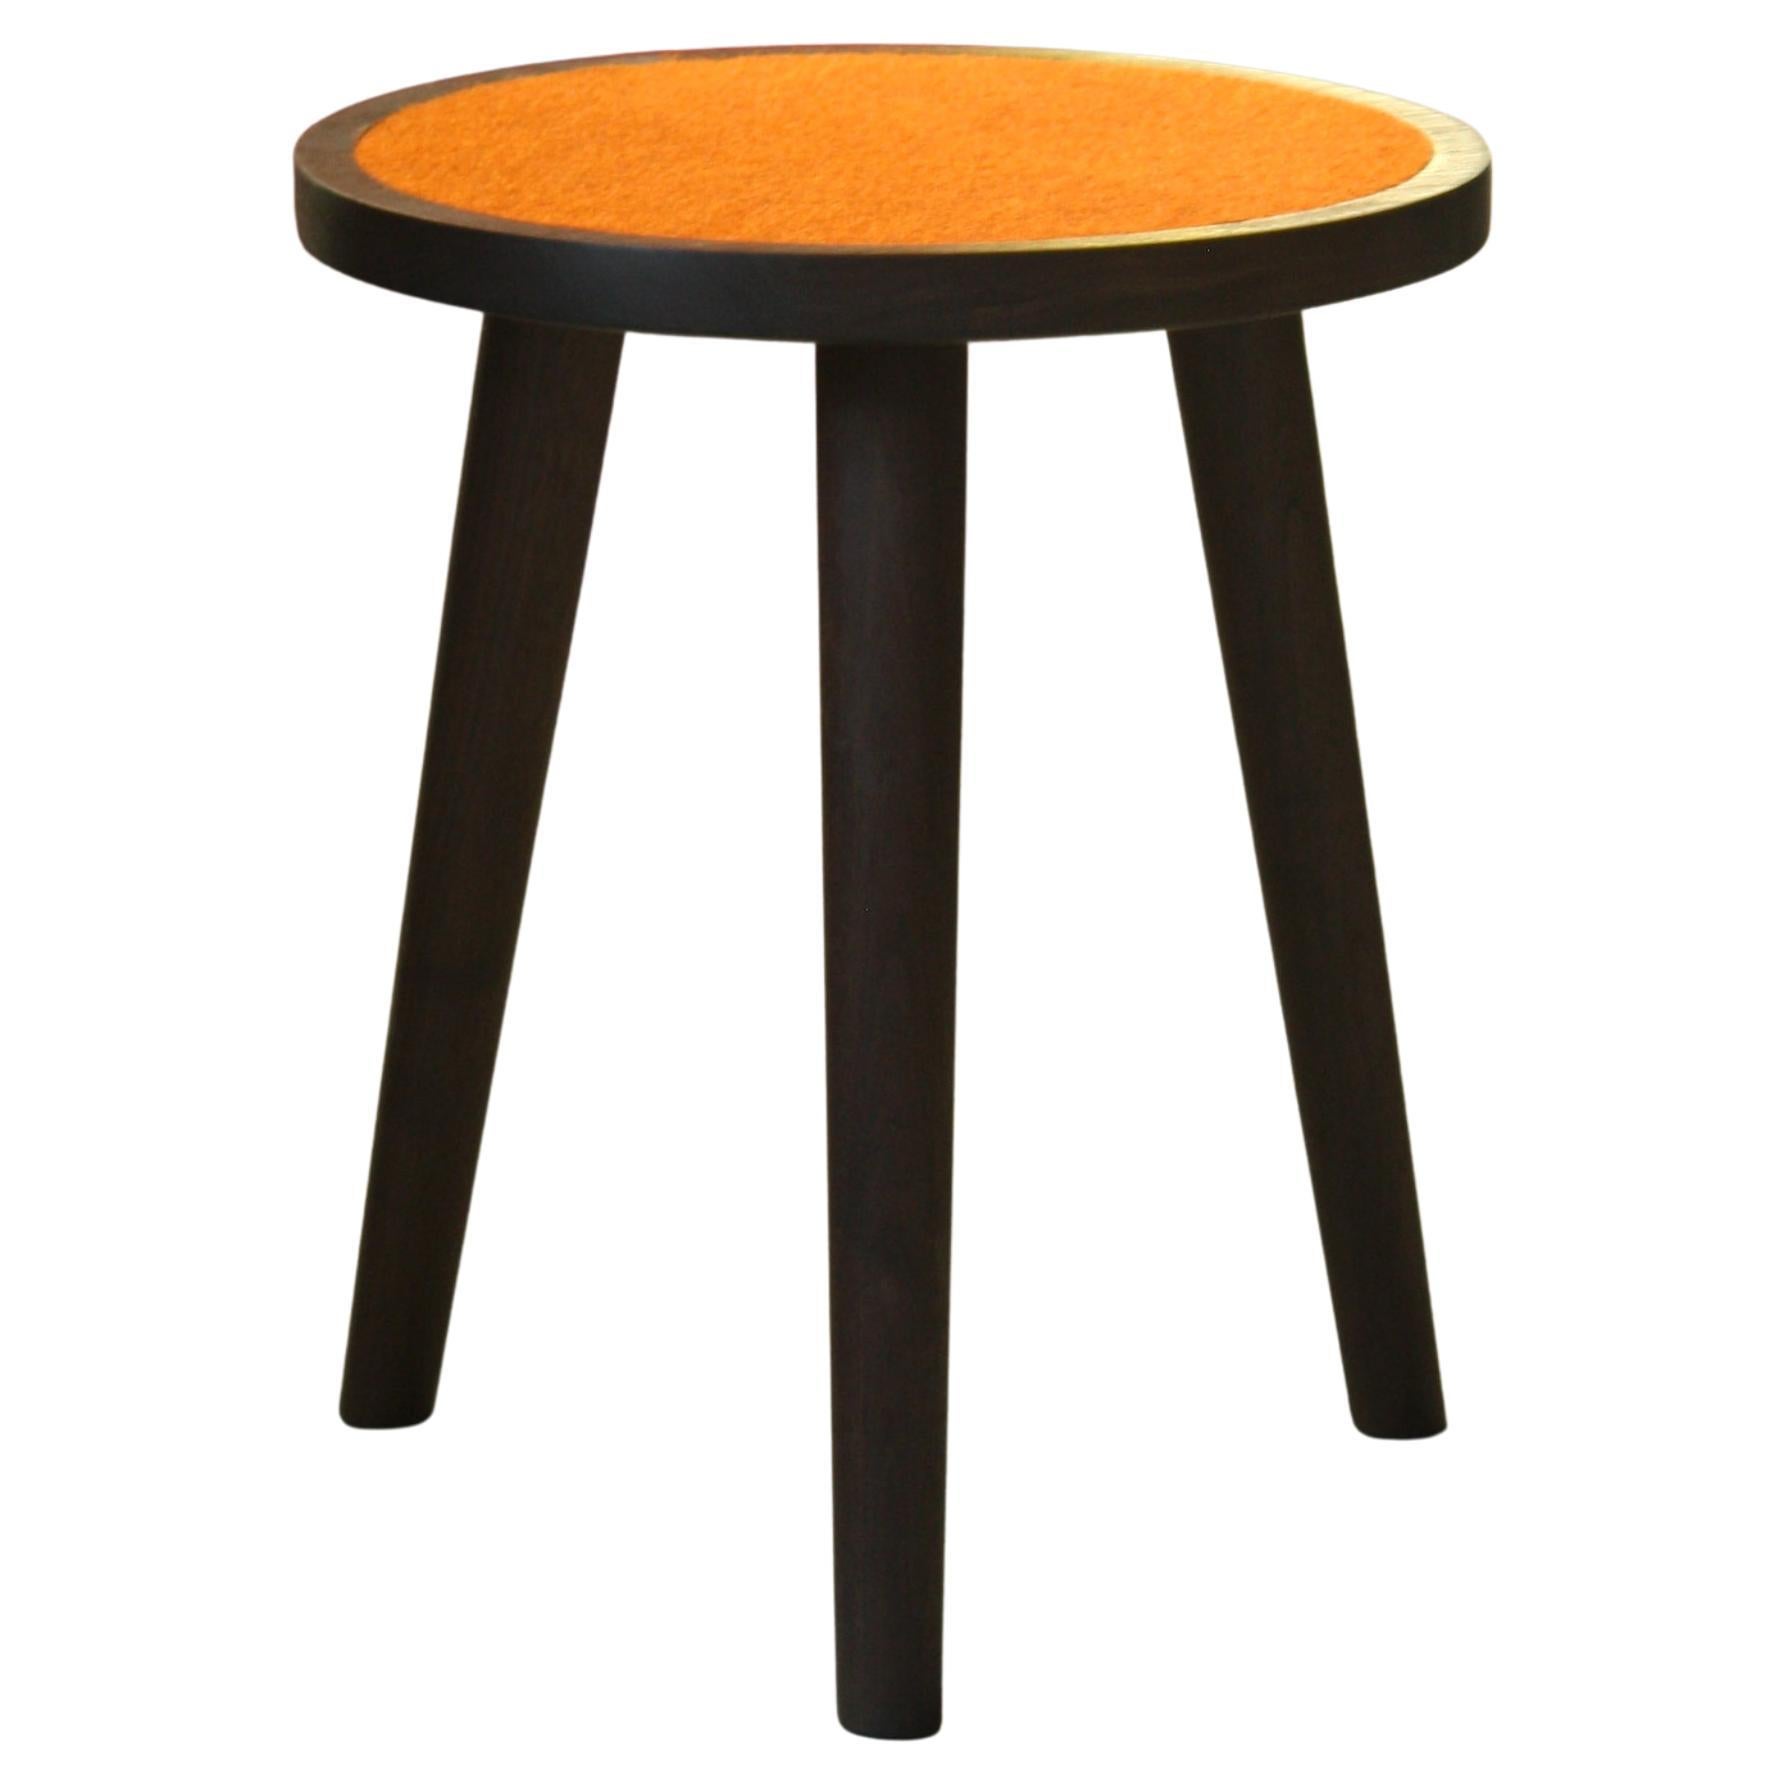 Bare a Handmade Wood Side Table with Inset Merino Felt by Laylo For Sale